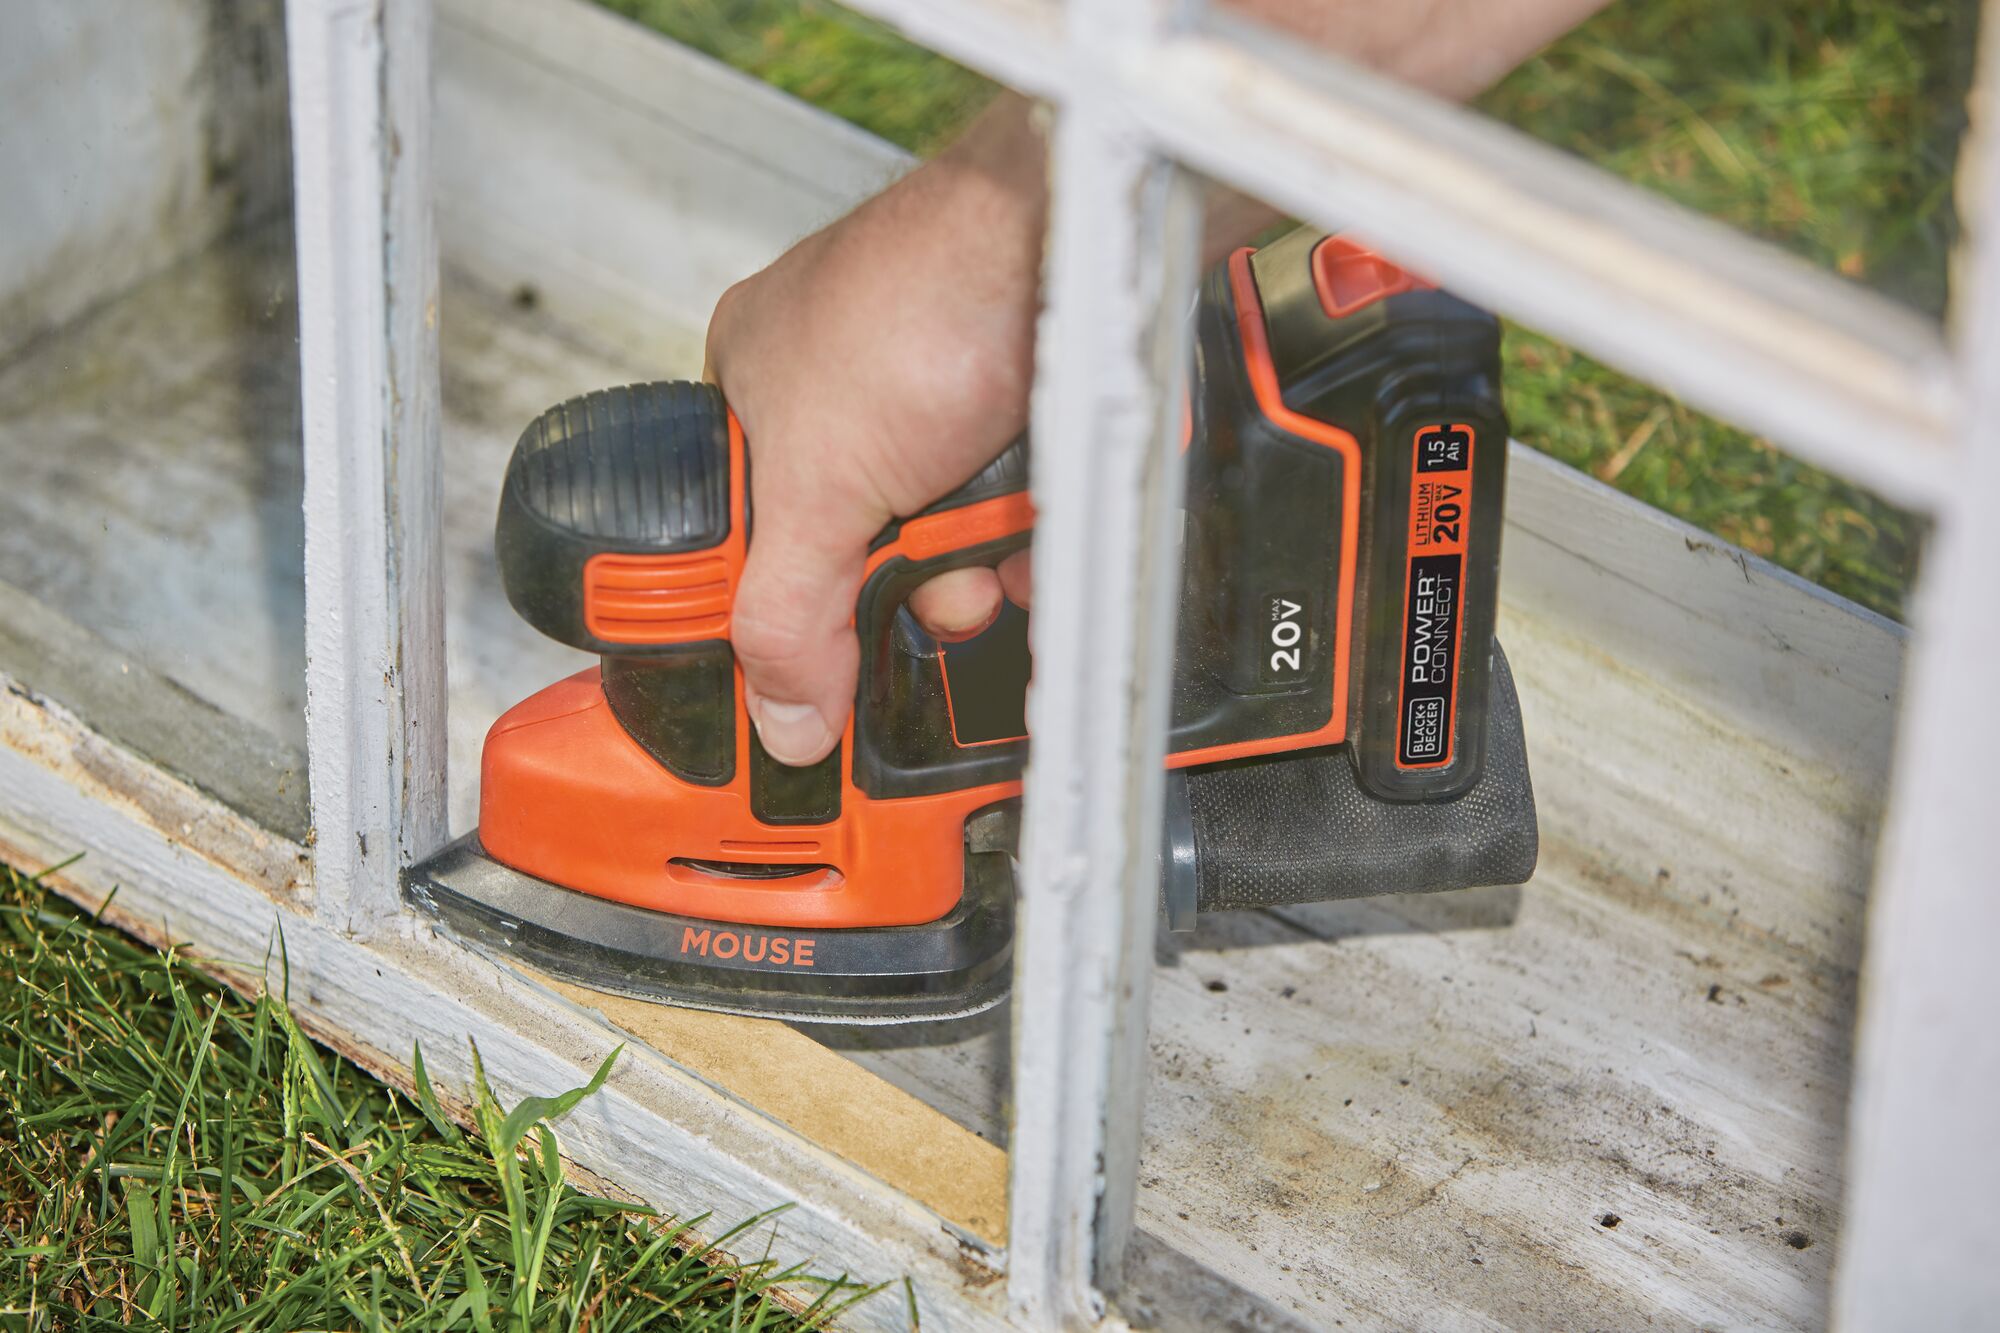 MAX MOUSE Cordless Sander being used to refinish wooden frame structure.